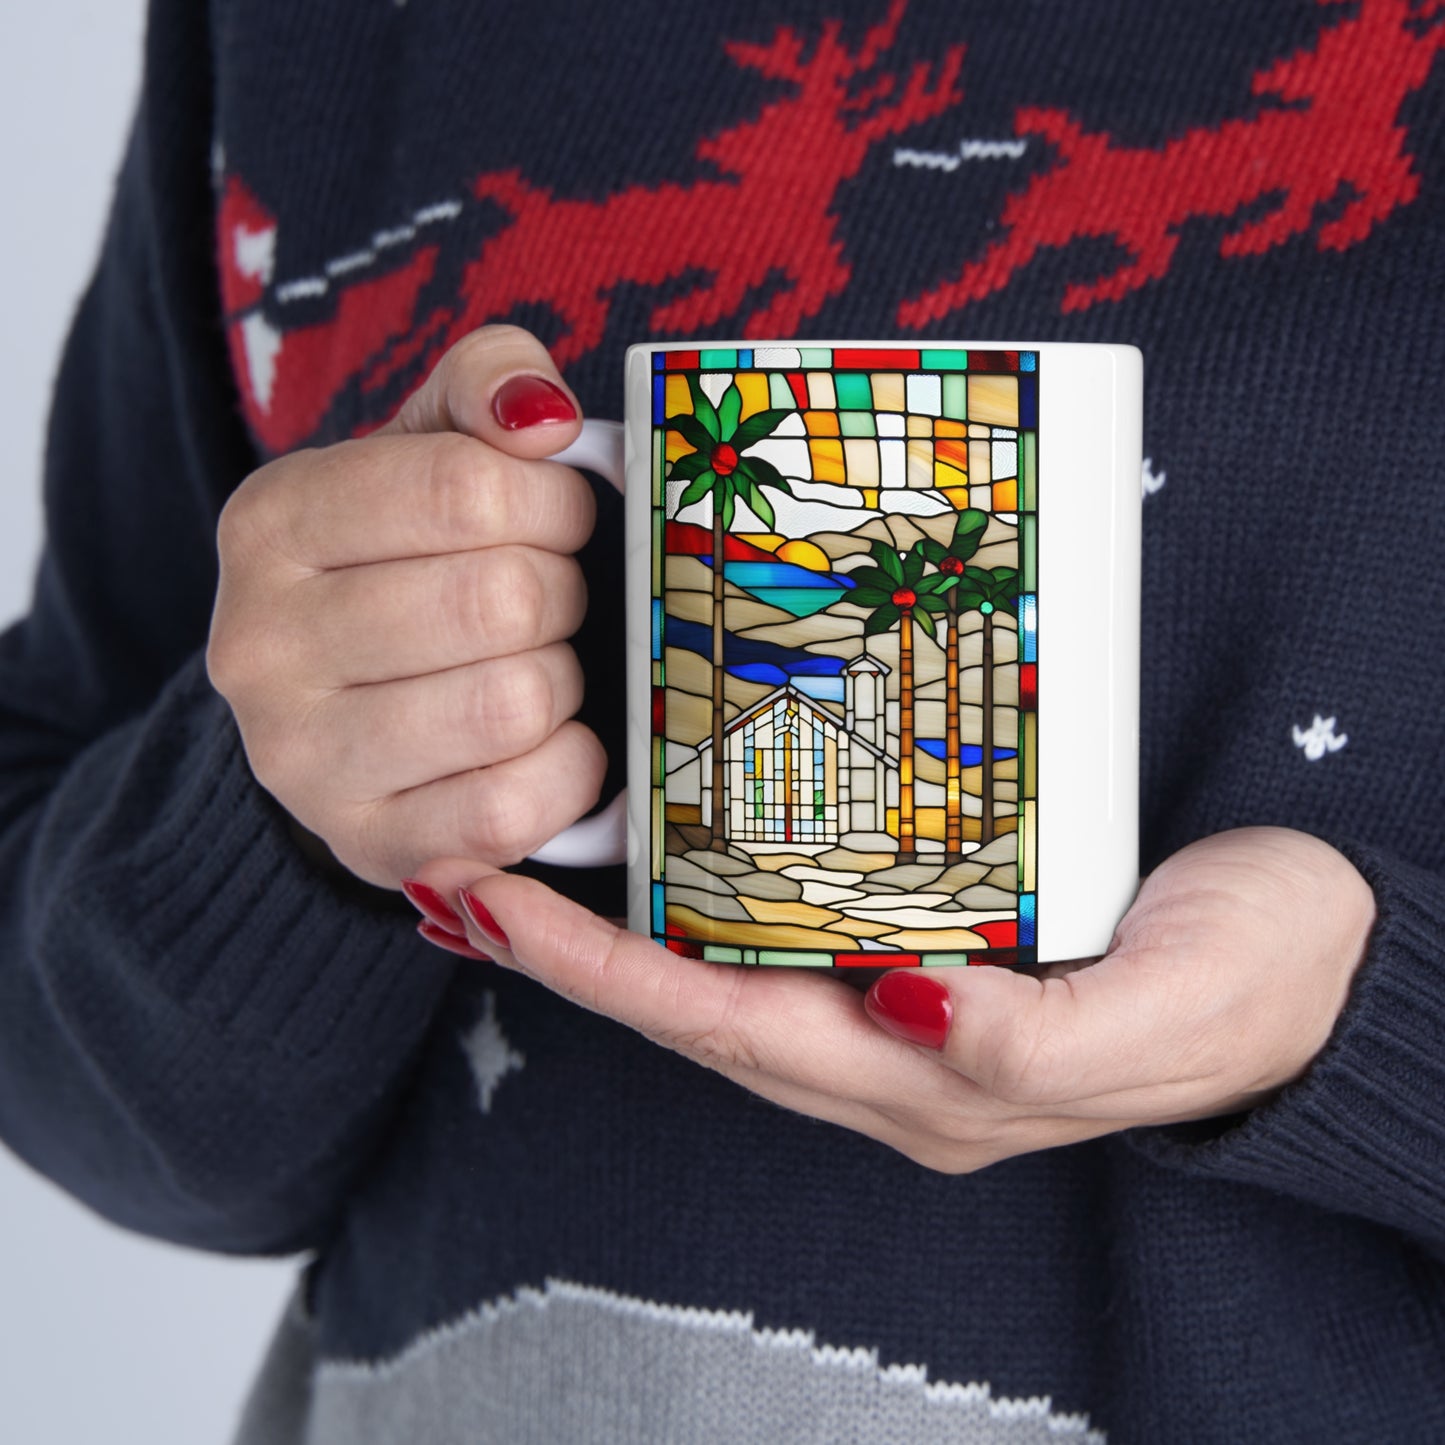 Christmas in Palm Springs  Tiffany's Studio Style Modernism Architecture  Ceramic Mug by ViralDestinations - Collectible Art at your hands